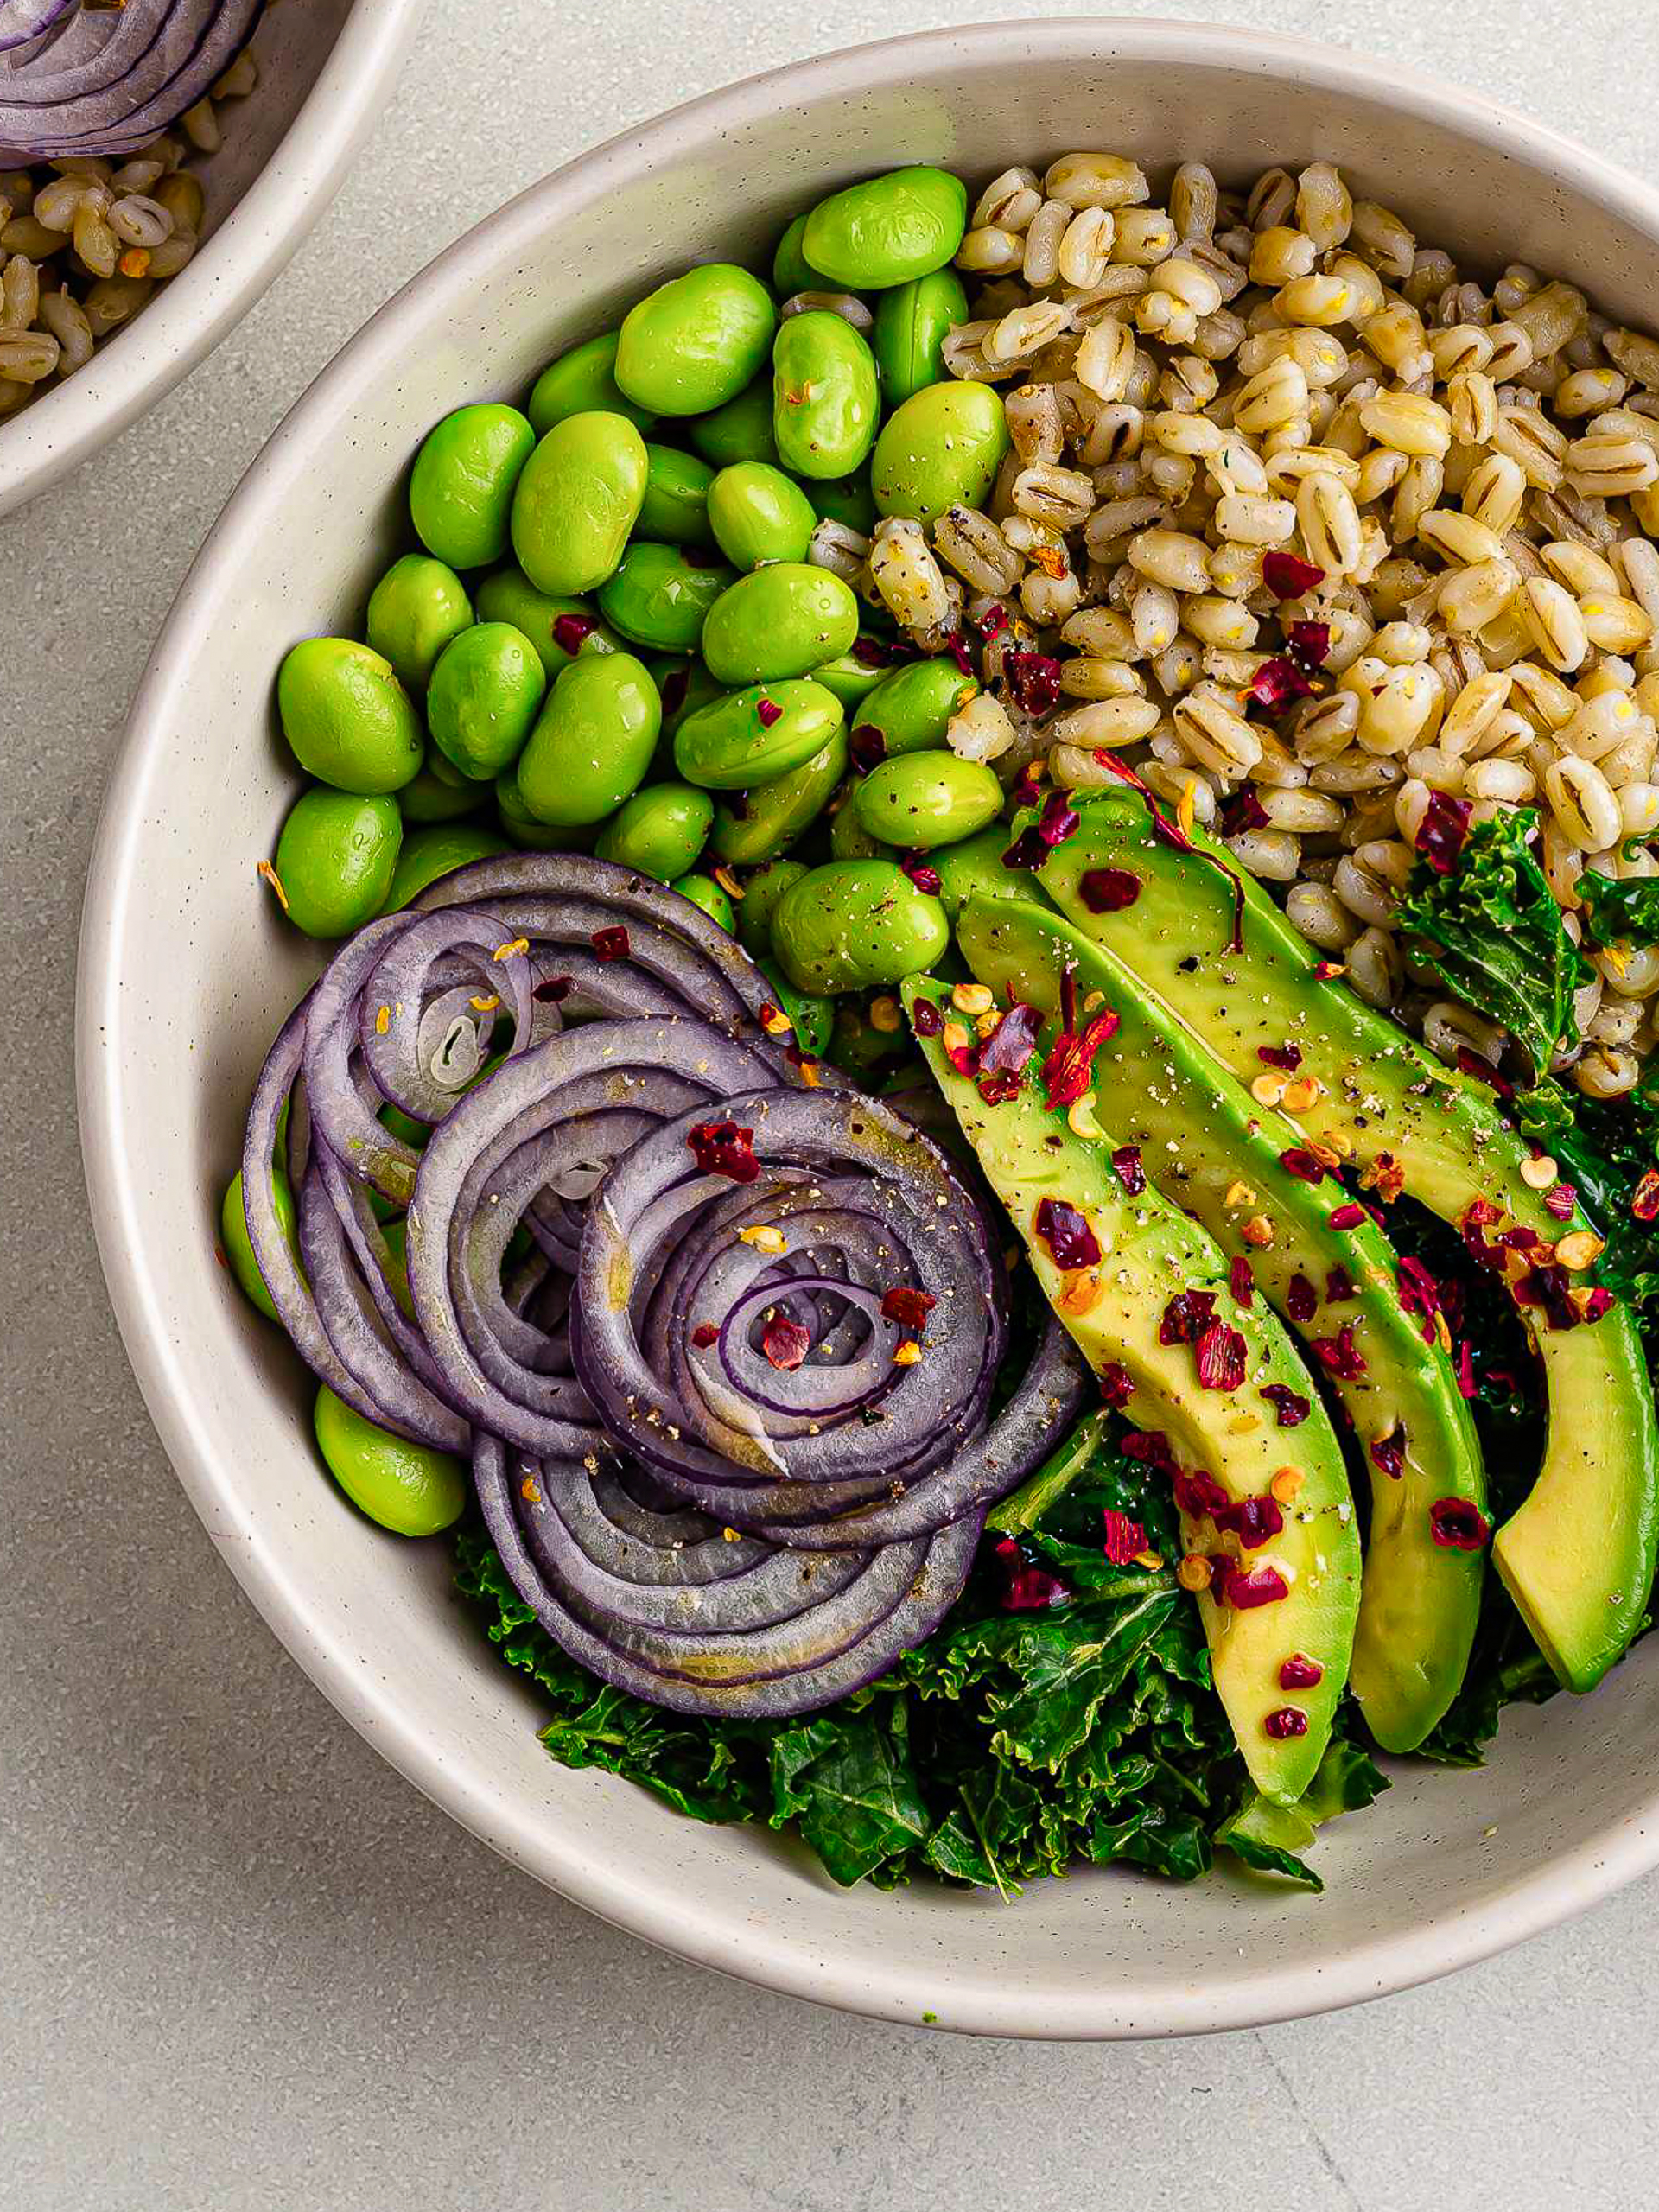 8 High-Fibre, High-Protein Meals for Weight Loss